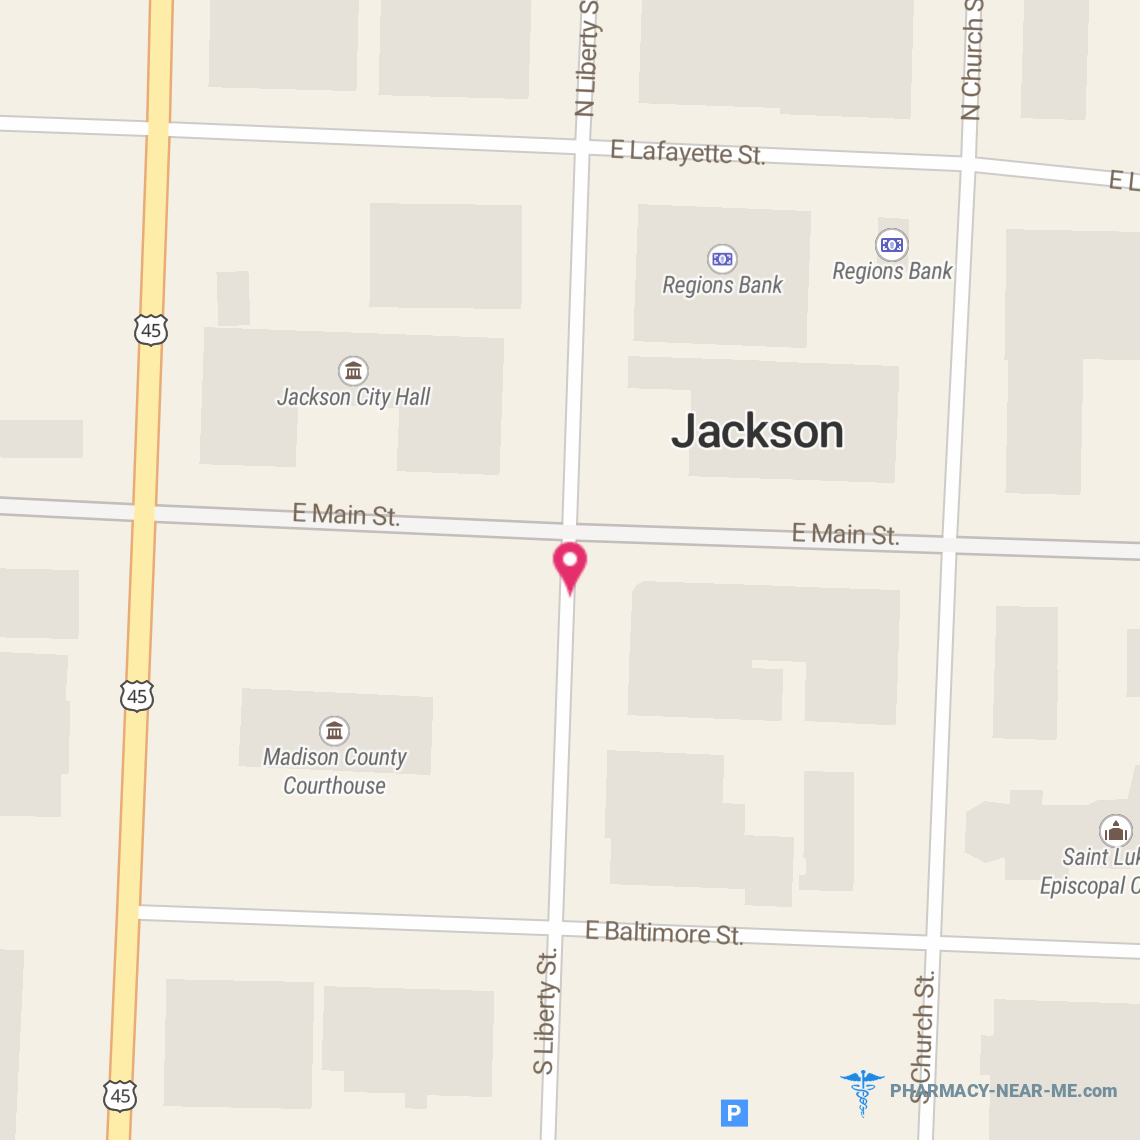 BAKER DRUG STORE - Pharmacy Hours, Phone, Reviews & Information: 200 W Main St, Jackson, Tennessee 38301, United States